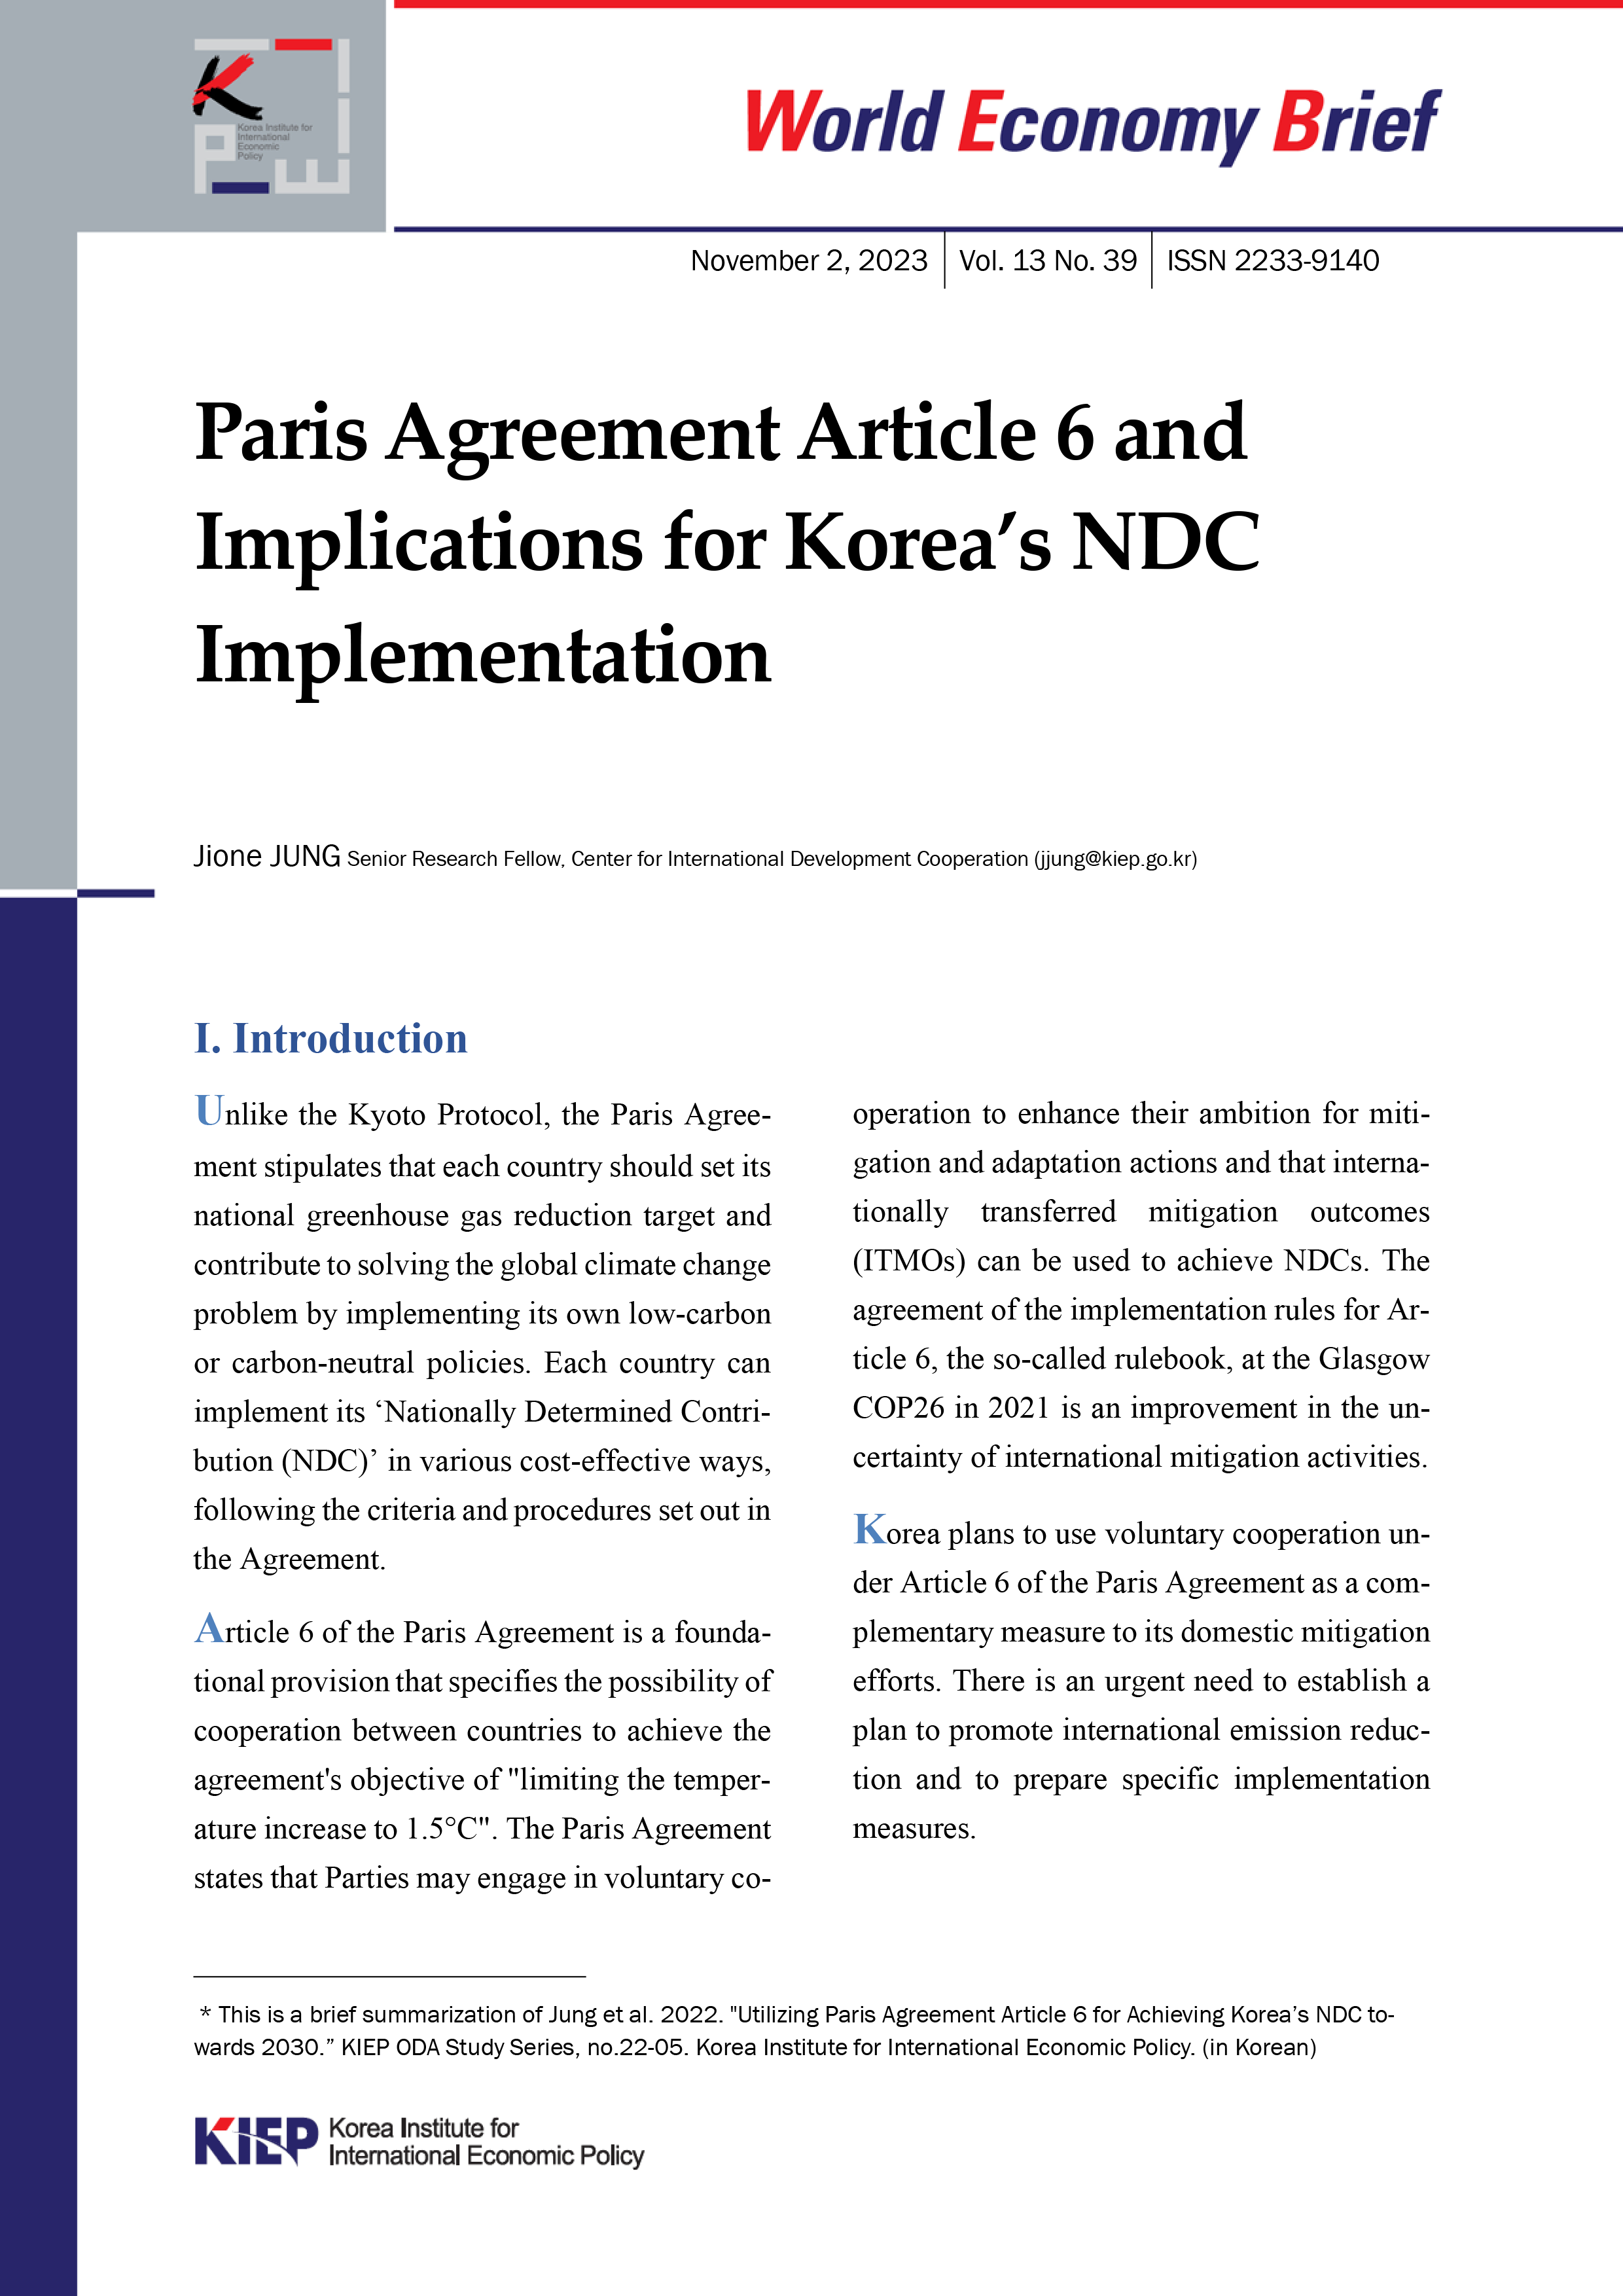 Paris Agreement Article 6 and Implications for Korea’s NDC Implementation